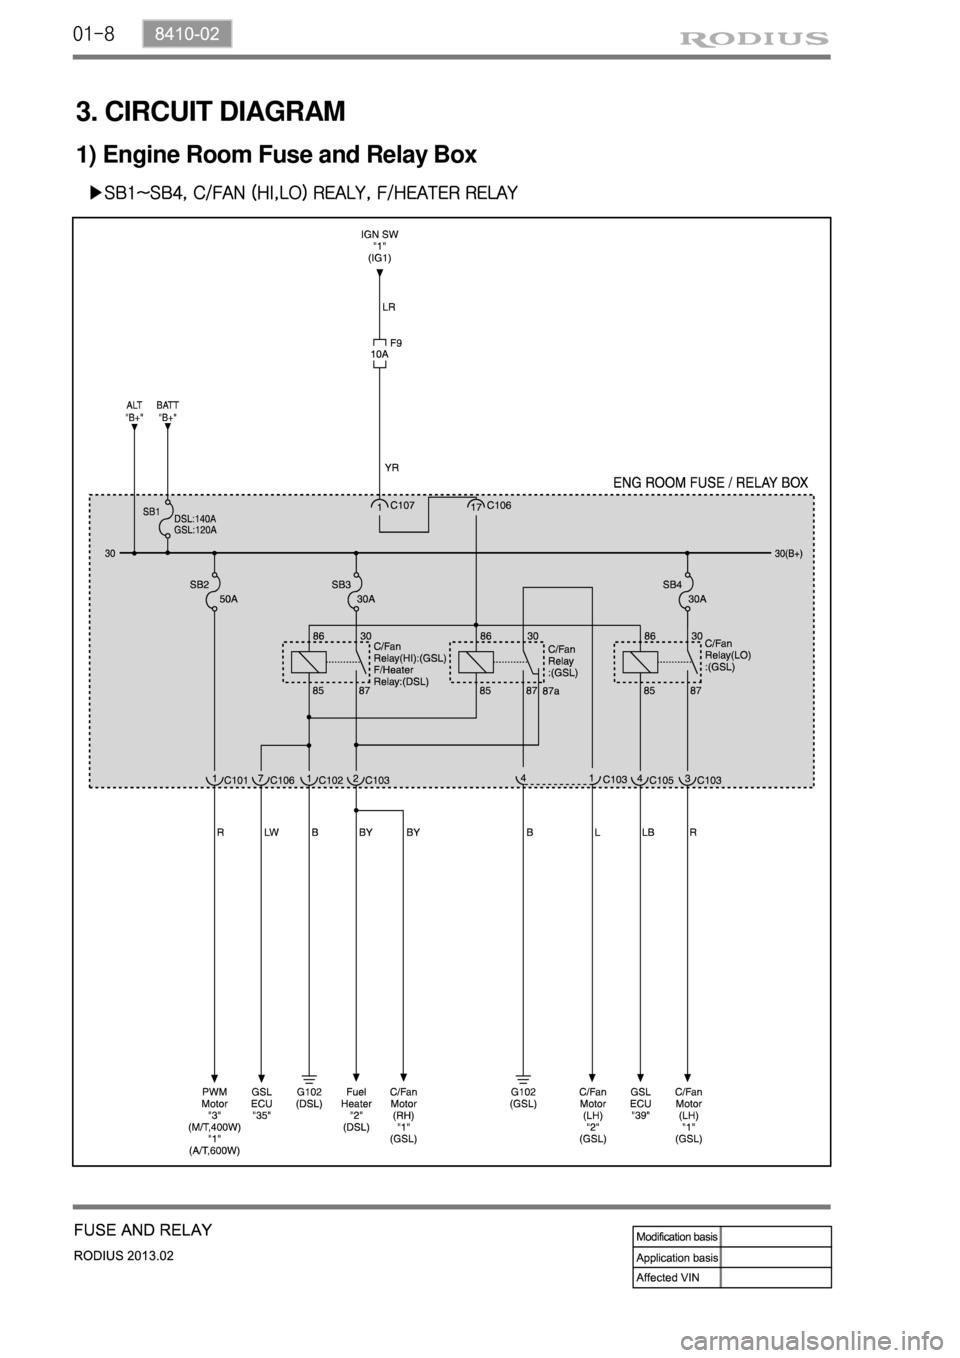 SSANGYONG TURISMO 2013  Service Manual 01-8
3. CIRCUIT DIAGRAM
▶SB1~SB4, C/FAN (HI,LO) REALY, F/HEATER RELAY
1) Engine Room Fuse and Relay Box 